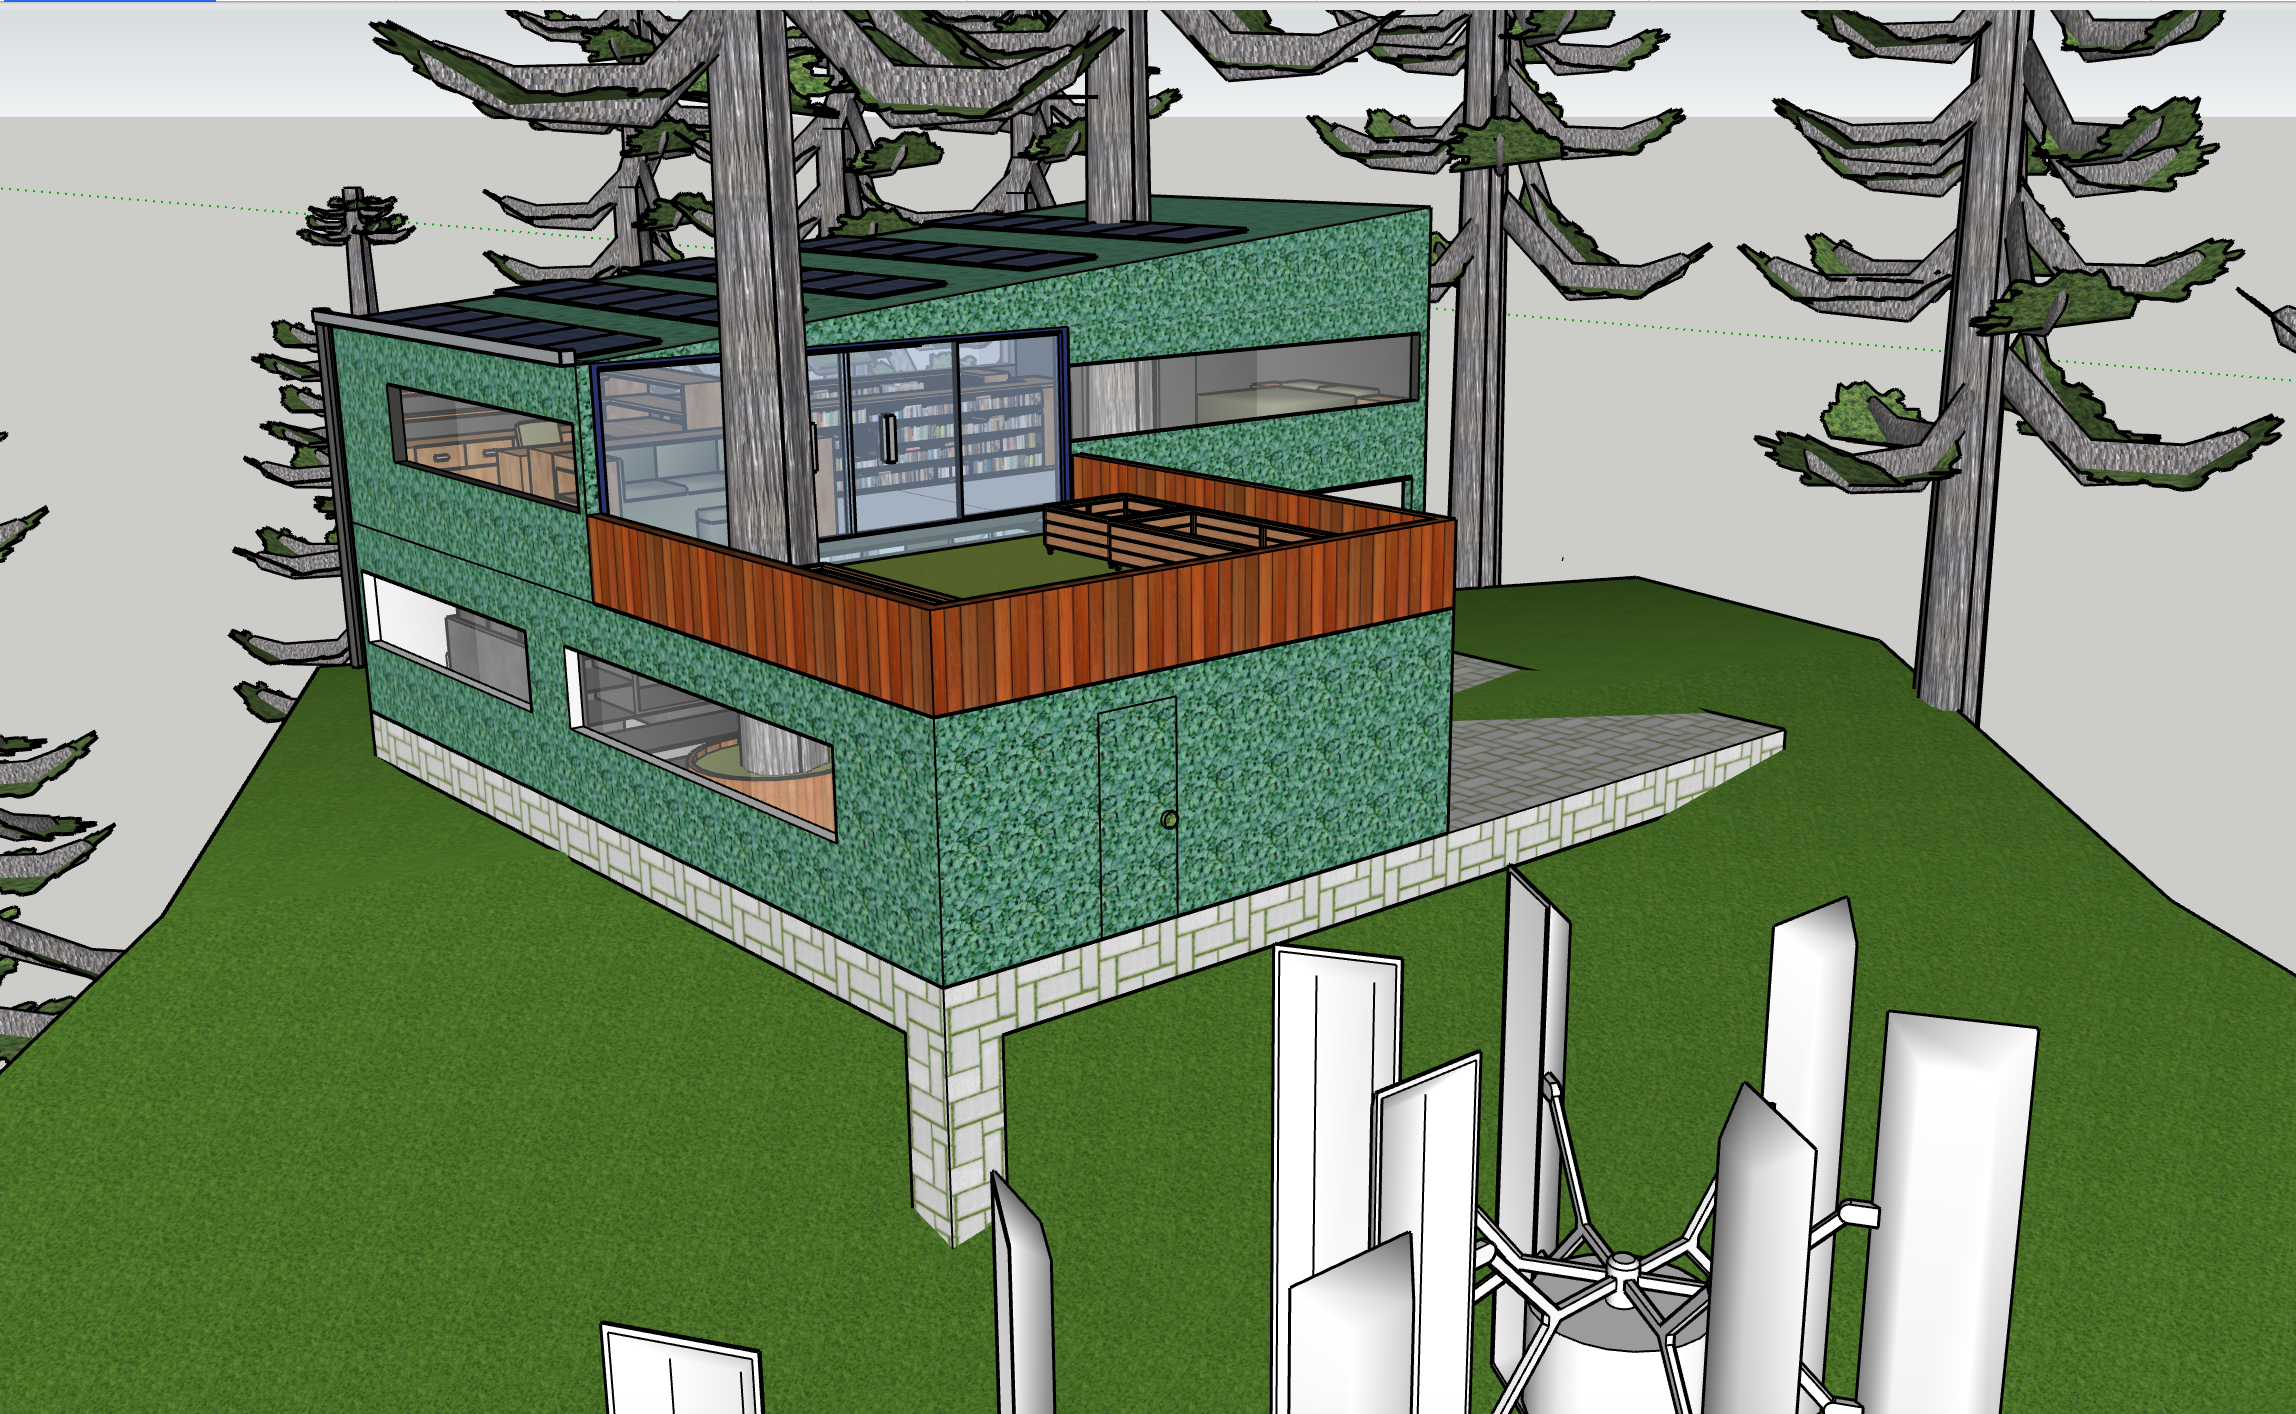 Digital model of small house built into a tree